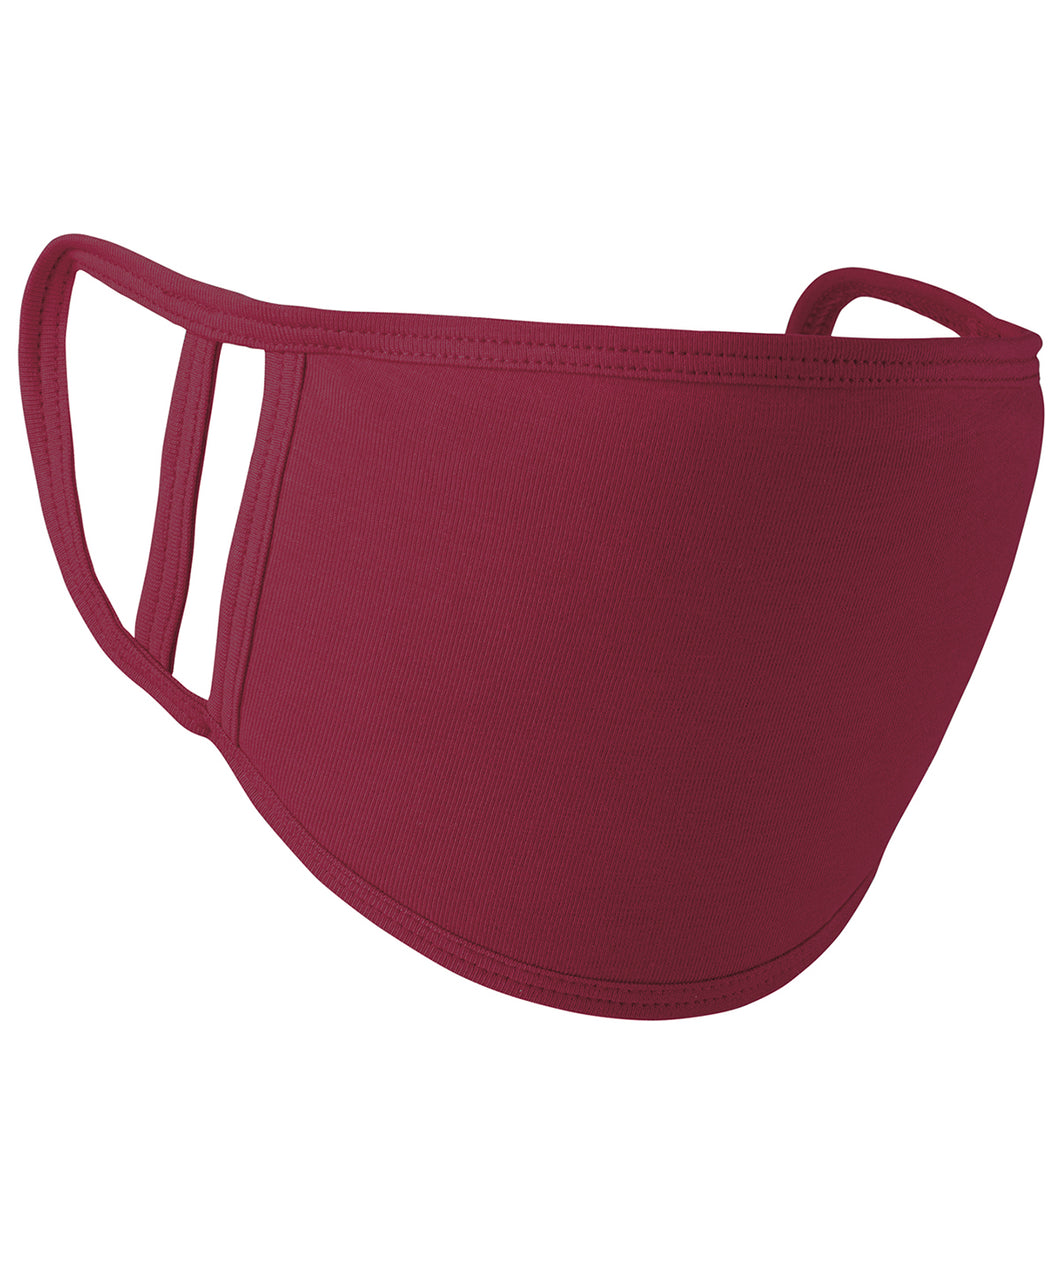 Washable Face Covering (Pack of 5) - Burgundy